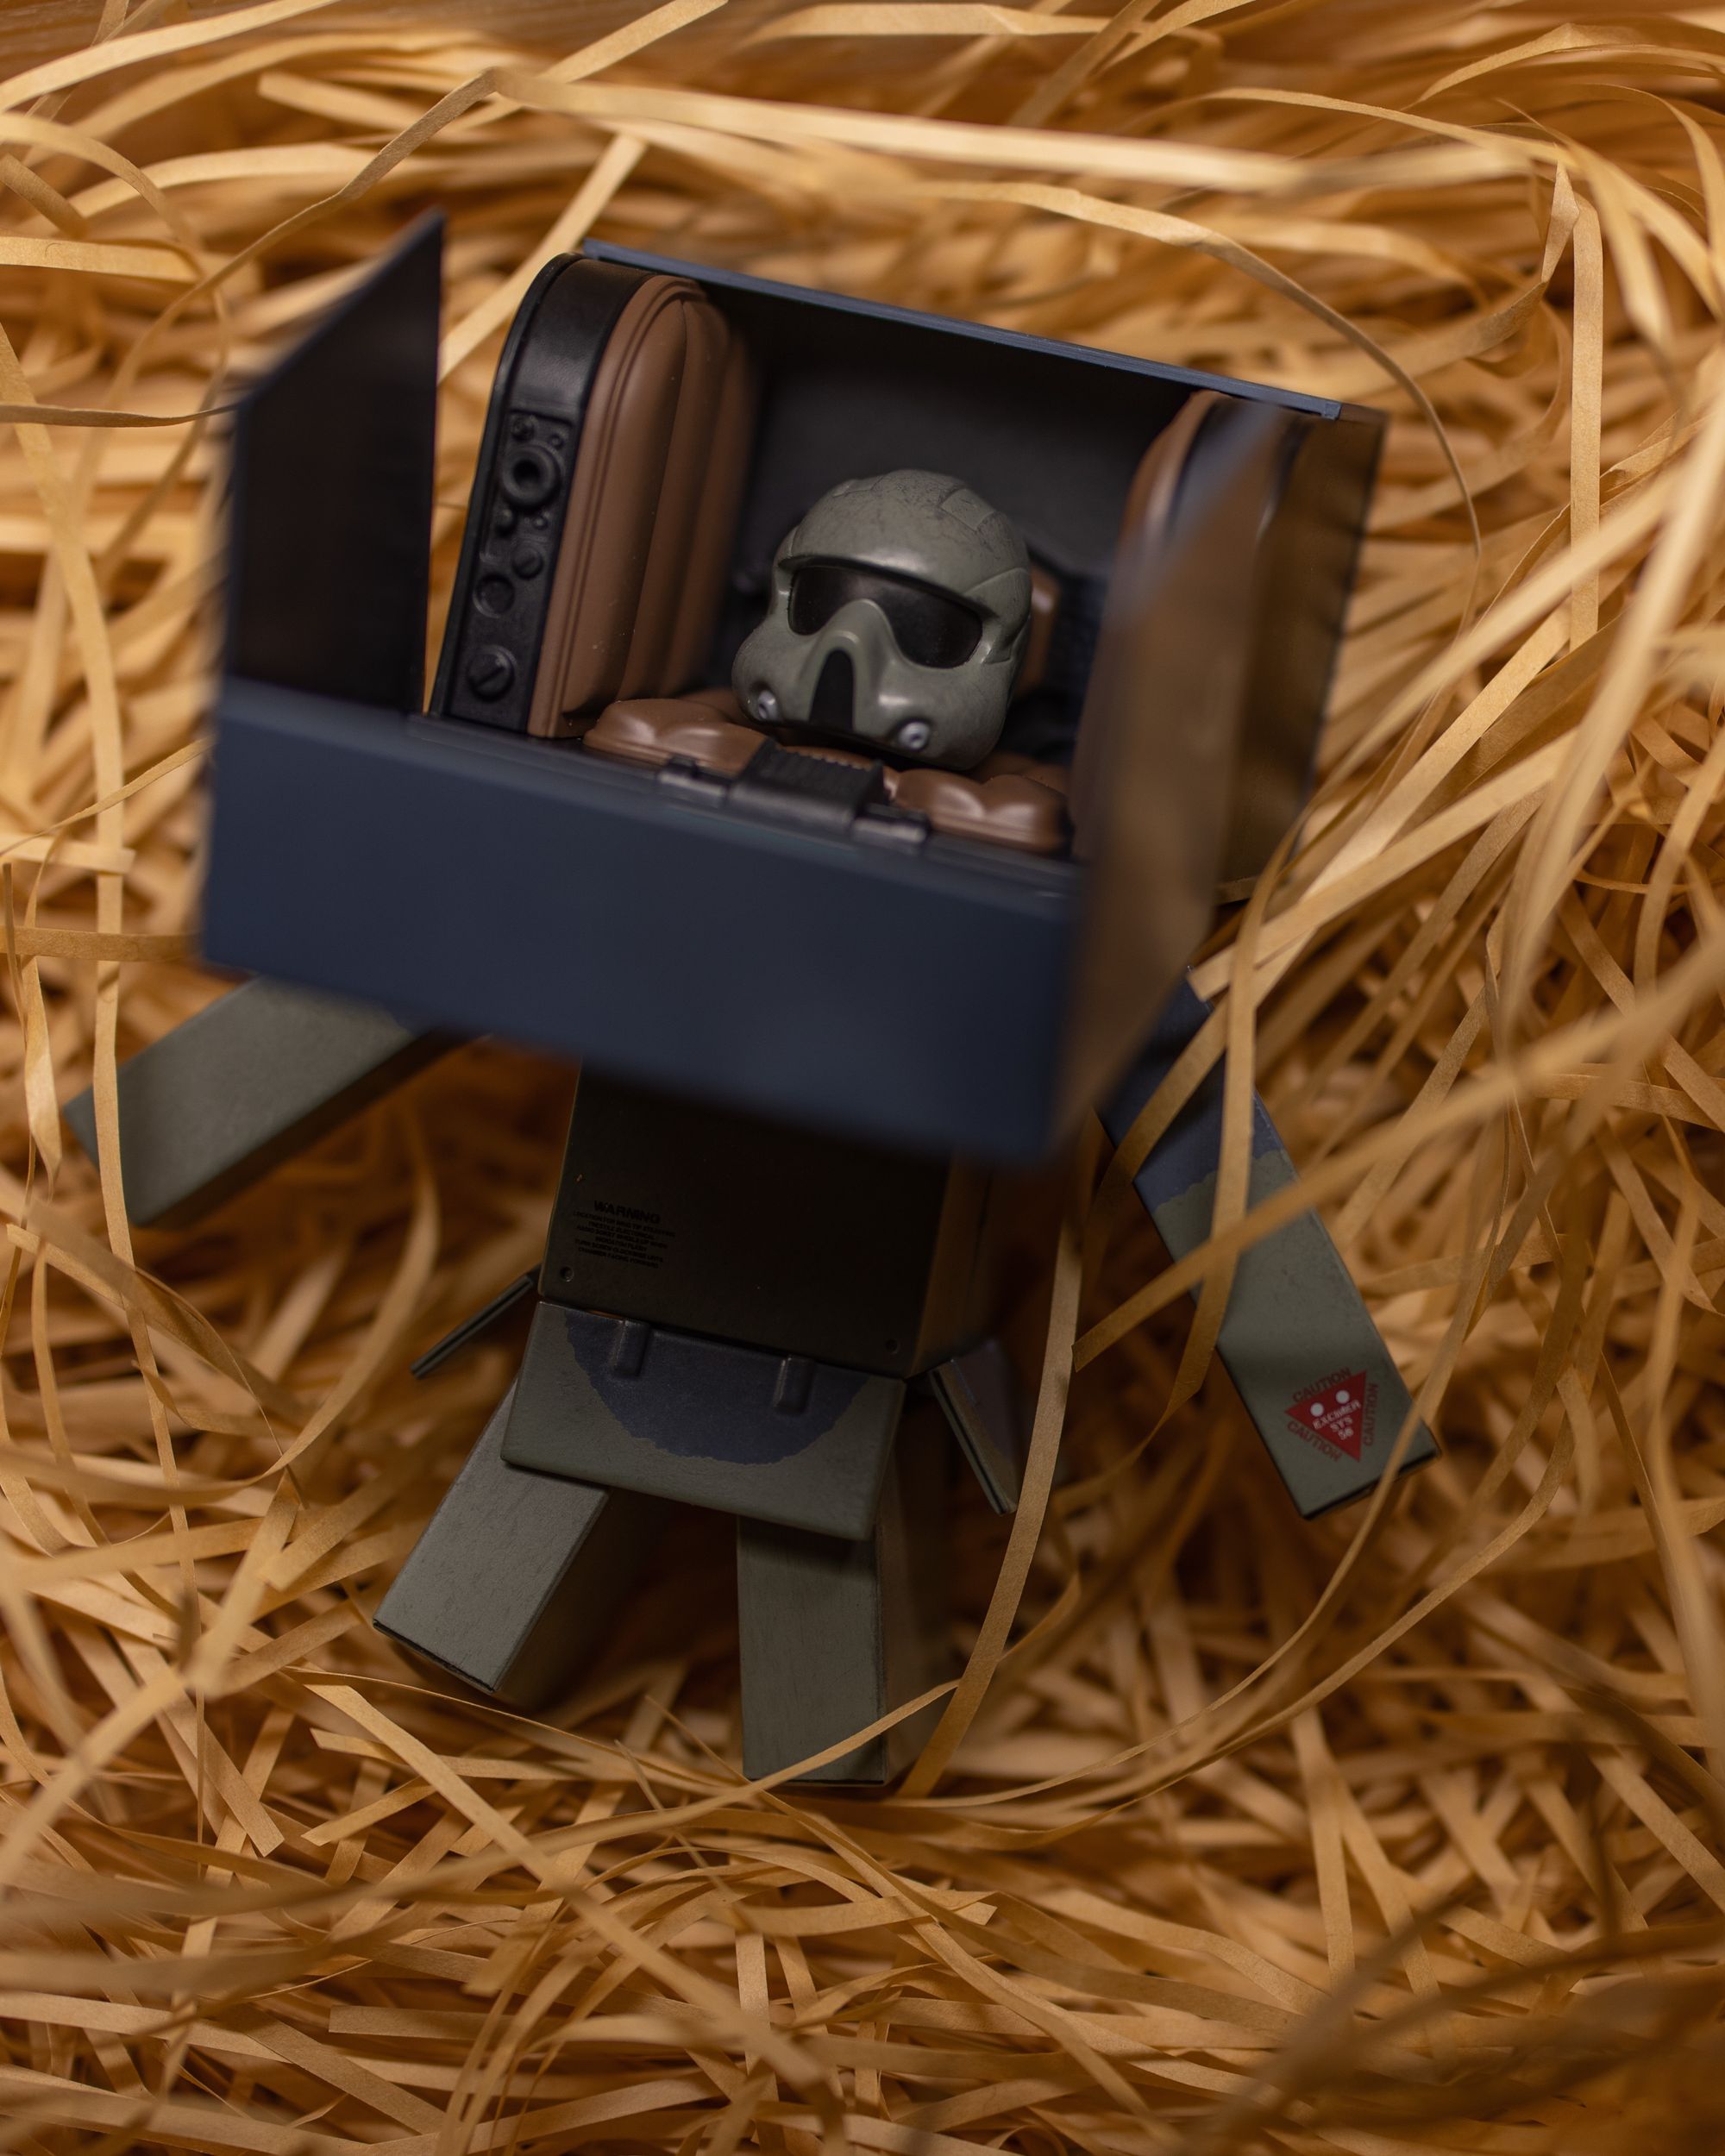 What’s That Little Box Robot in Your Photos? It’s Danbo!